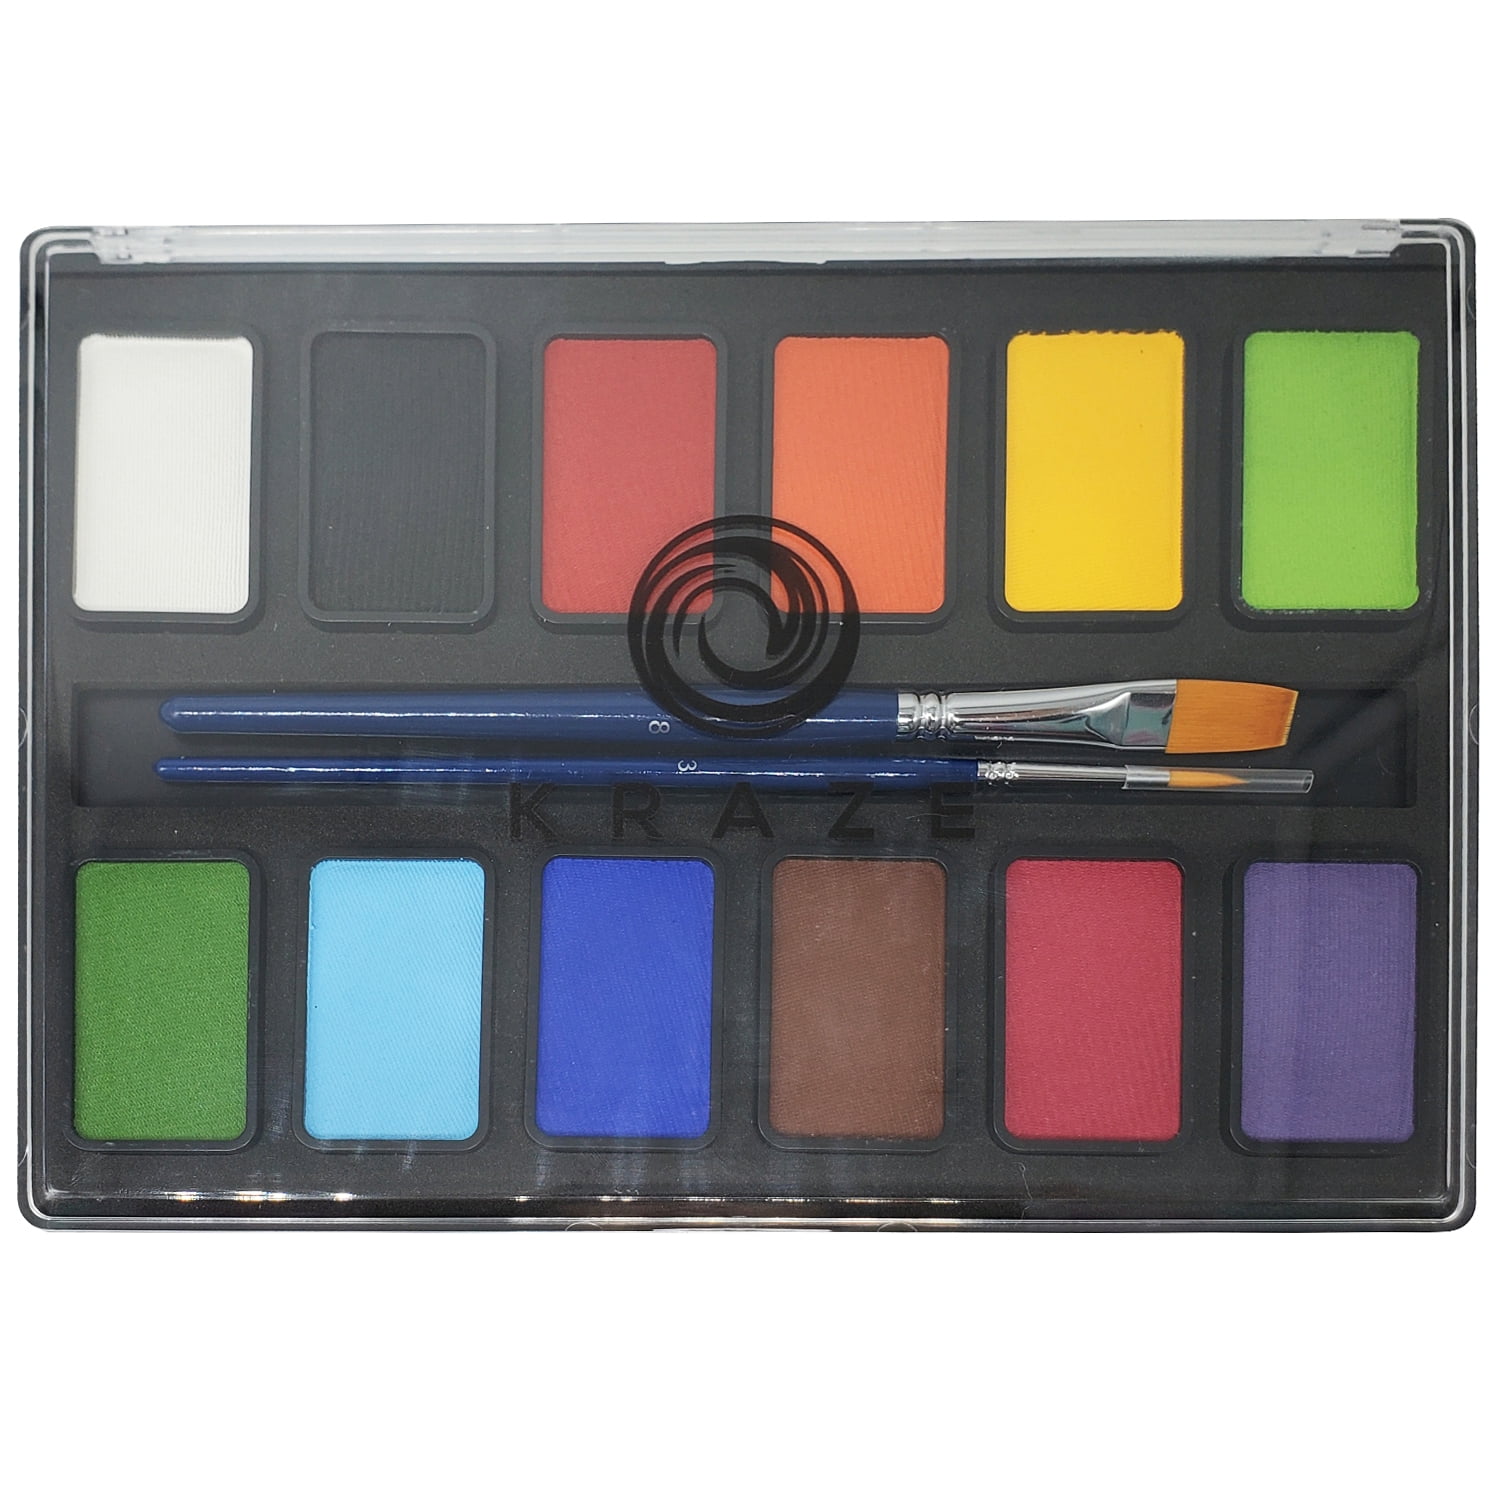 Professional Face And Body Paint Palette With Brush 15 Colour Non-toxic  Face Paint For Kid Adult Washable Safe Face